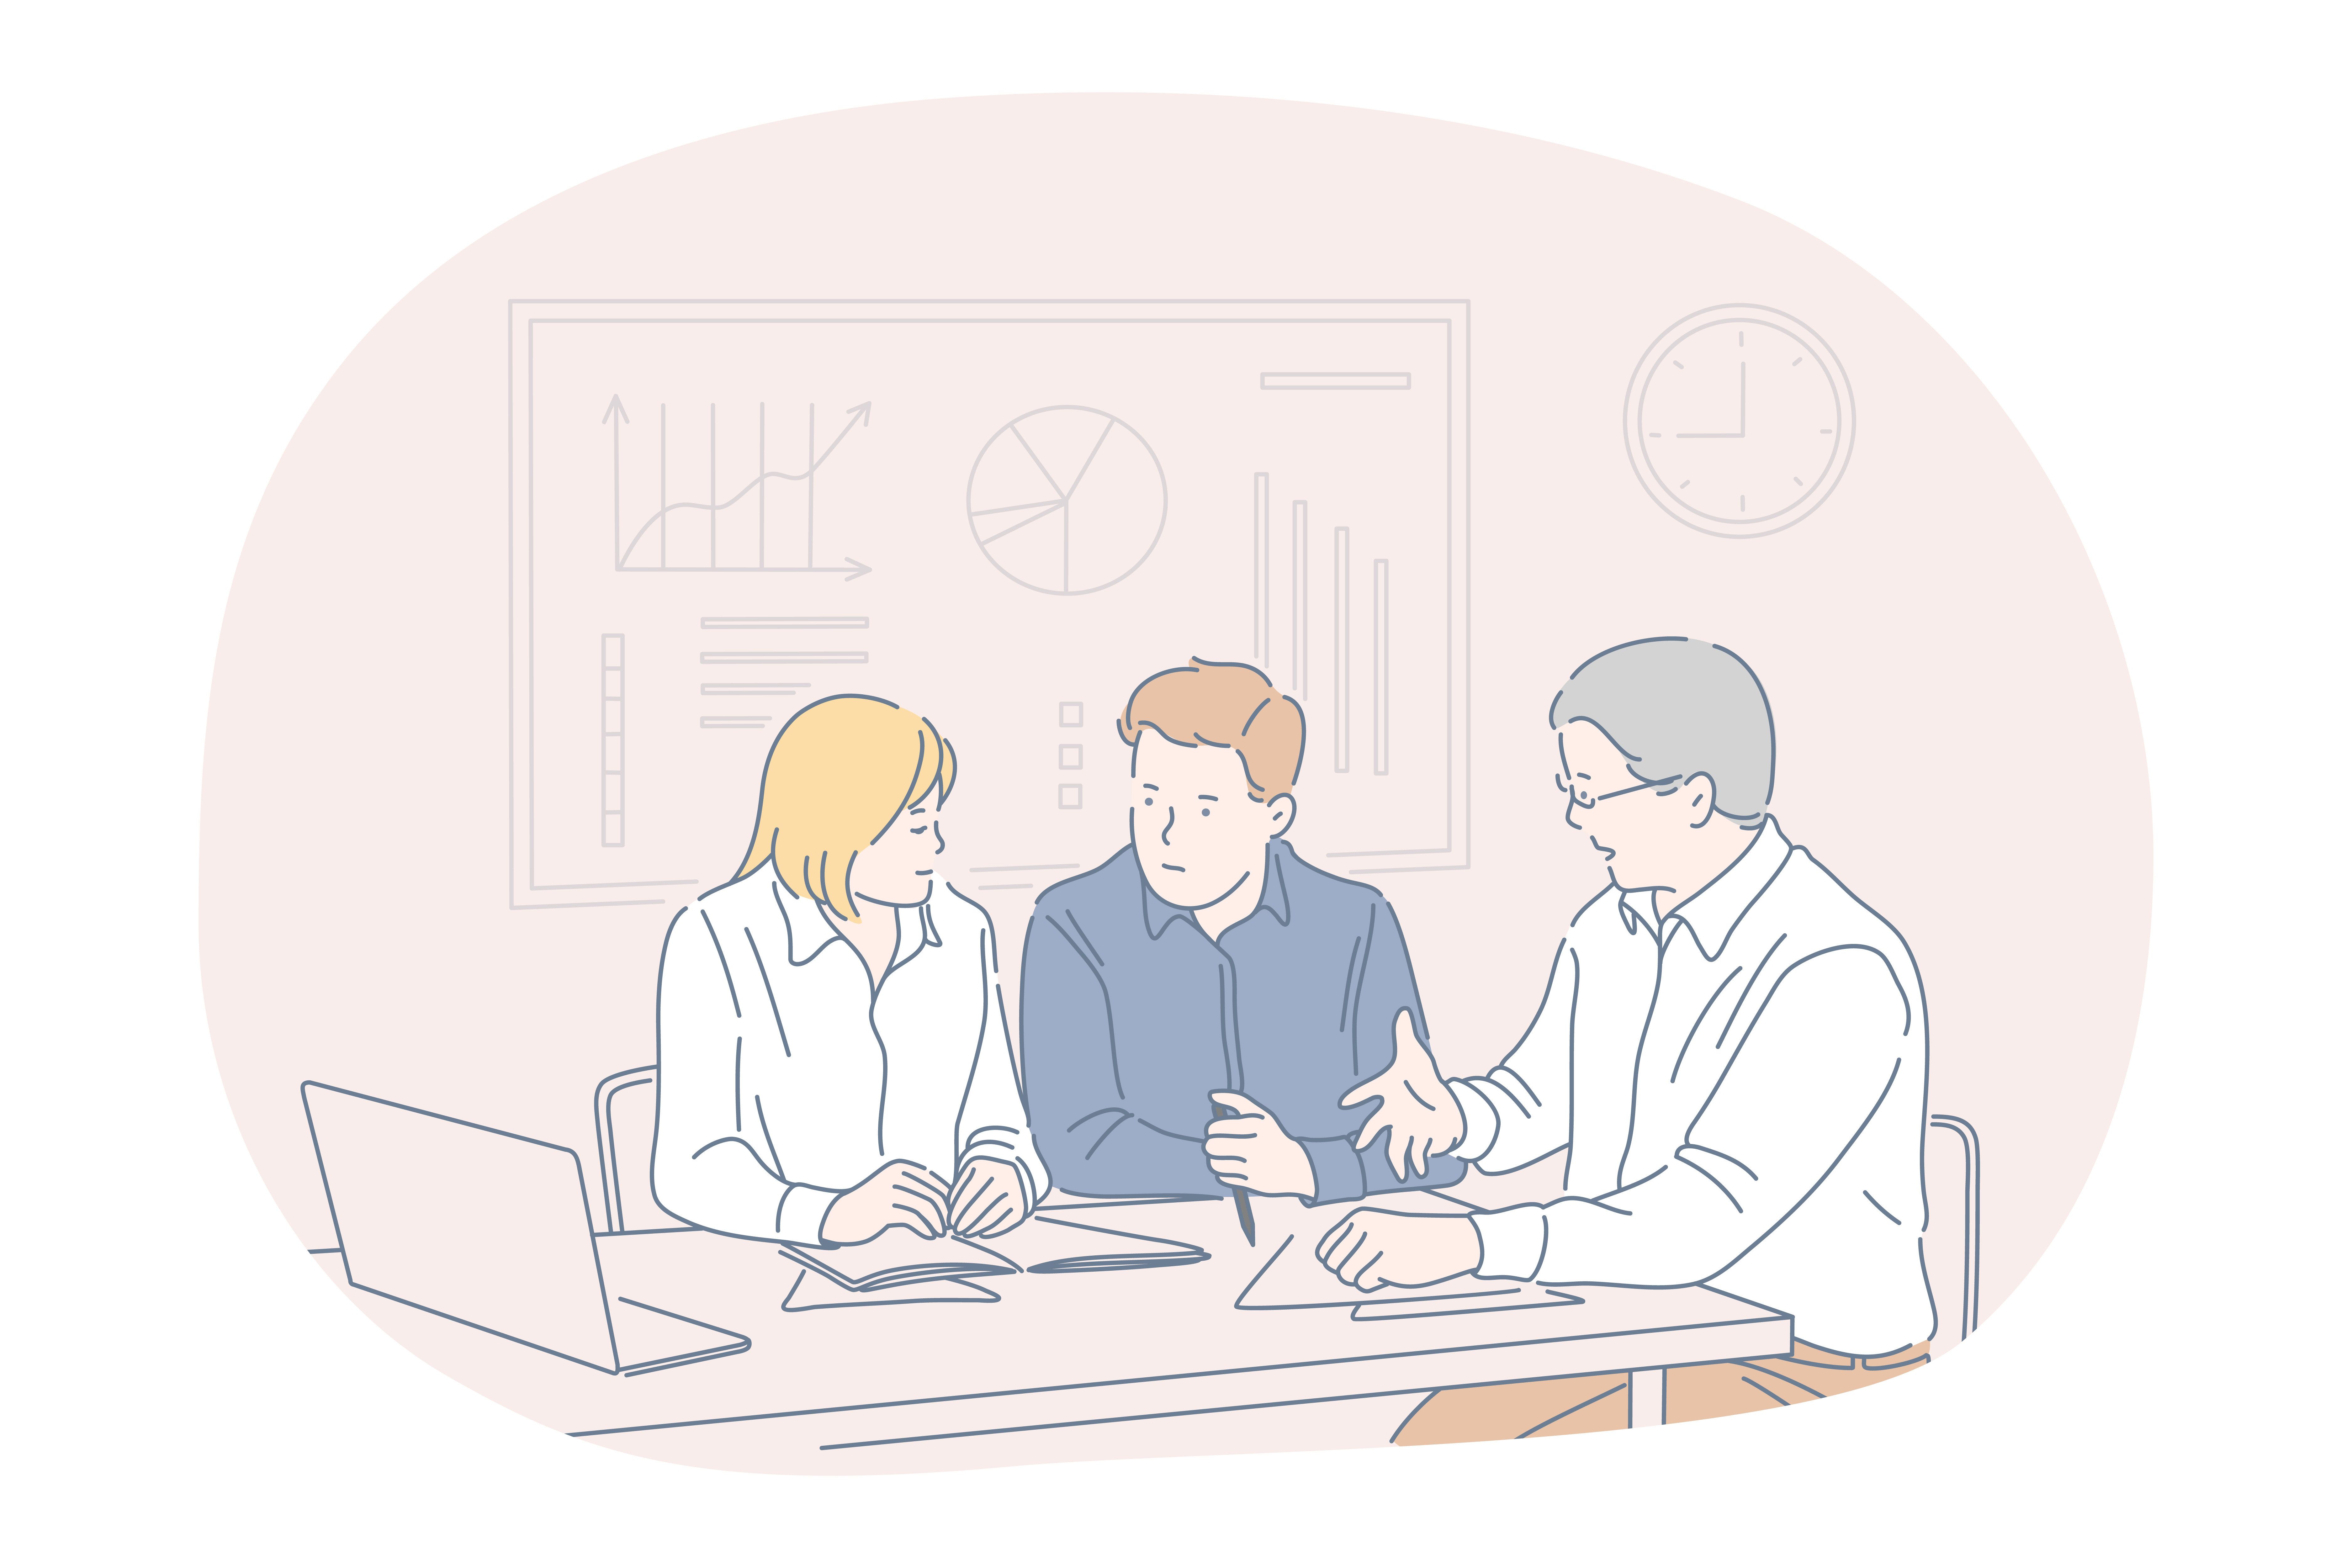 Teamwork, brainstorming, business communication about startup concept. Group of business people coworkers or partners cartoon characters sitting discussing financial development and strategy together. Teamwork, brainstorming, business communication about startup concept